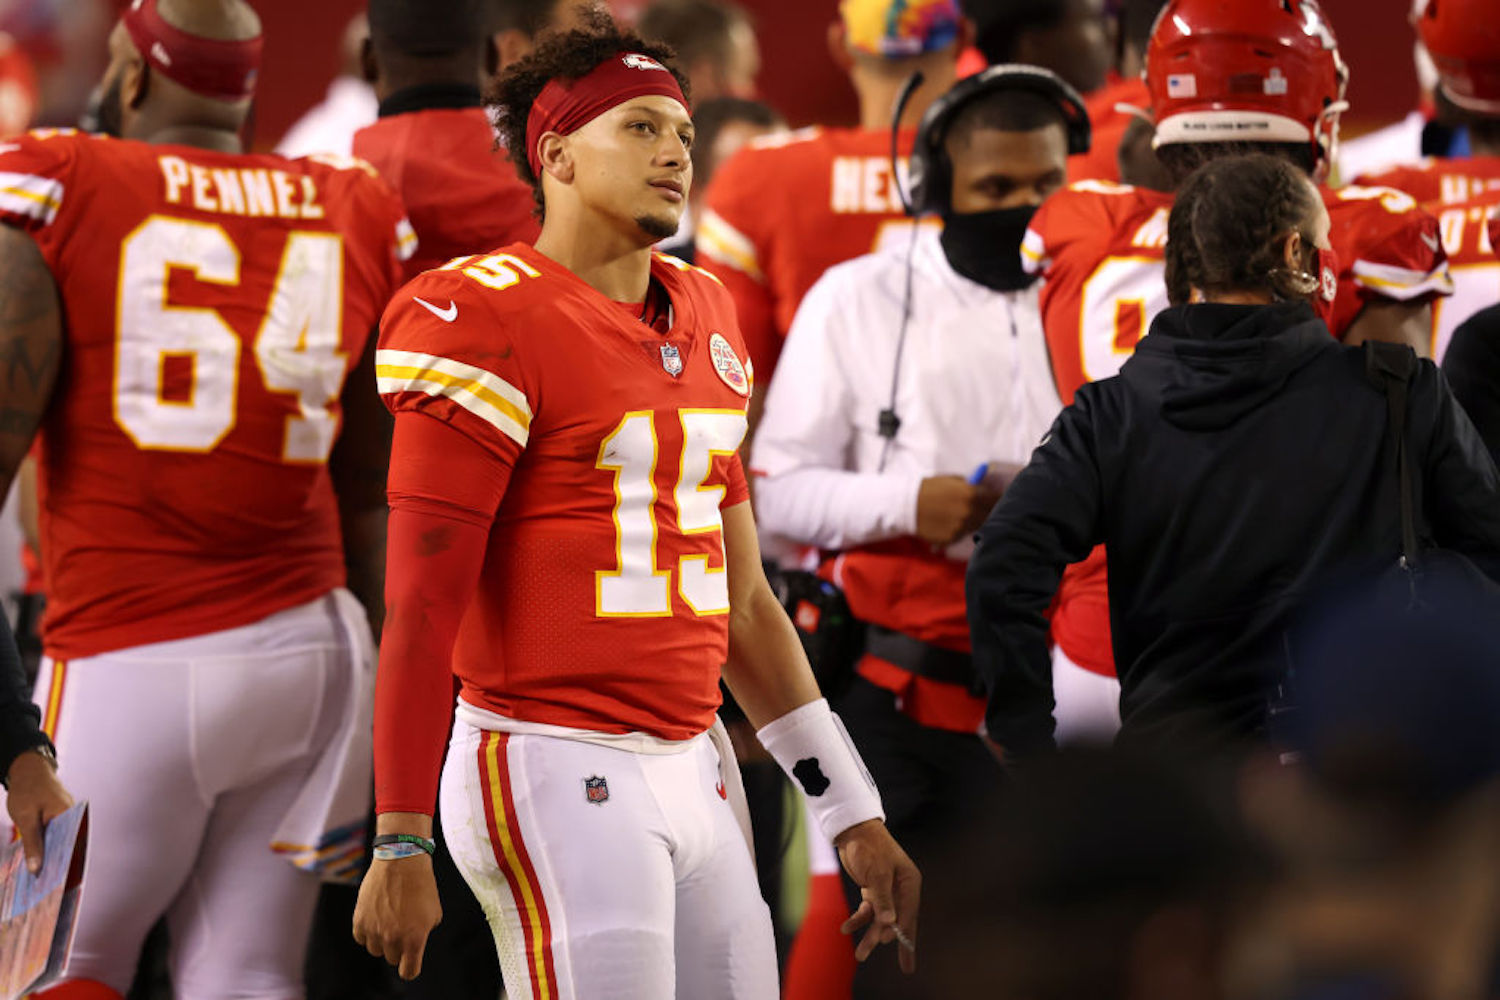 Stephon Gilmore tested positive for COVID-19 two days after Monday's game against the Chiefs, and Patrick Mahomes should be worried.